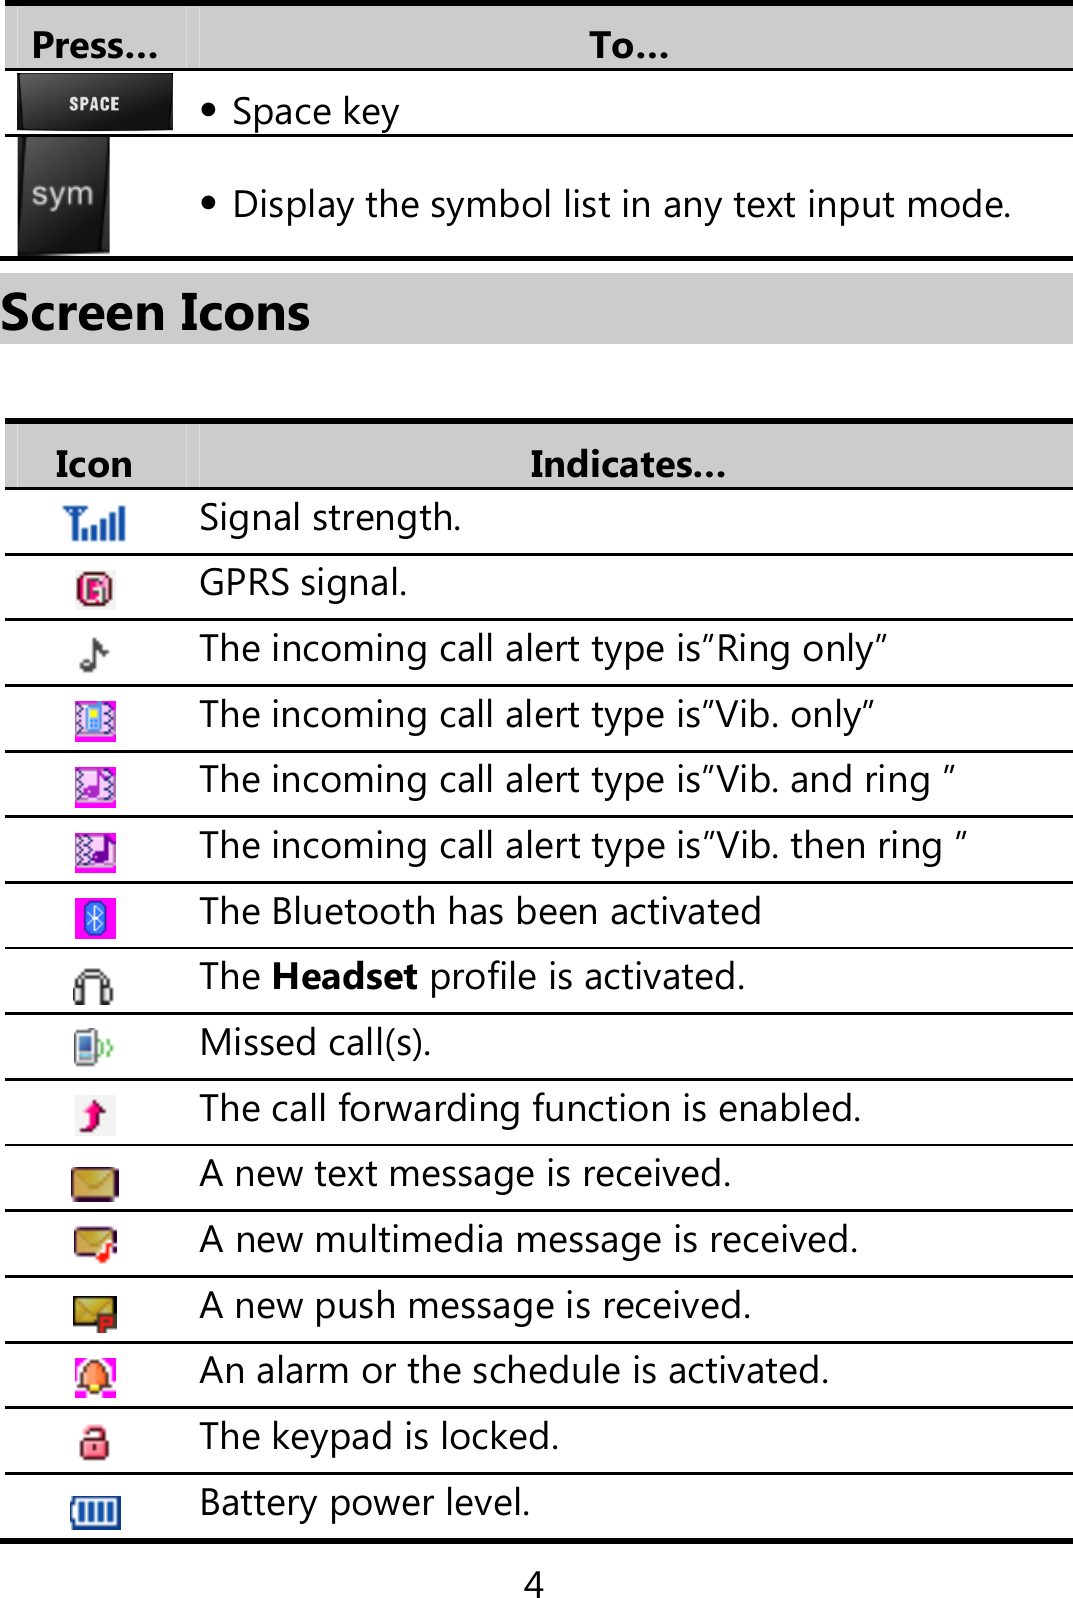 4 Press…  To…   Space key   Display the symbol list in any text input mode. Screen Icons  Icon  Indicates…  Signal strength. GPRS signal.  The incoming call alert type is”Ring only”  The incoming call alert type is”Vib. only”  The incoming call alert type is”Vib. and ring ” The incoming call alert type is”Vib. then ring ” The Bluetooth has been activated The Headset profile is activated. Missed call(s). The call forwarding function is enabled.  A new text message is received. A new multimedia message is received.  A new push message is received. An alarm or the schedule is activated.  The keypad is locked. Battery power level.